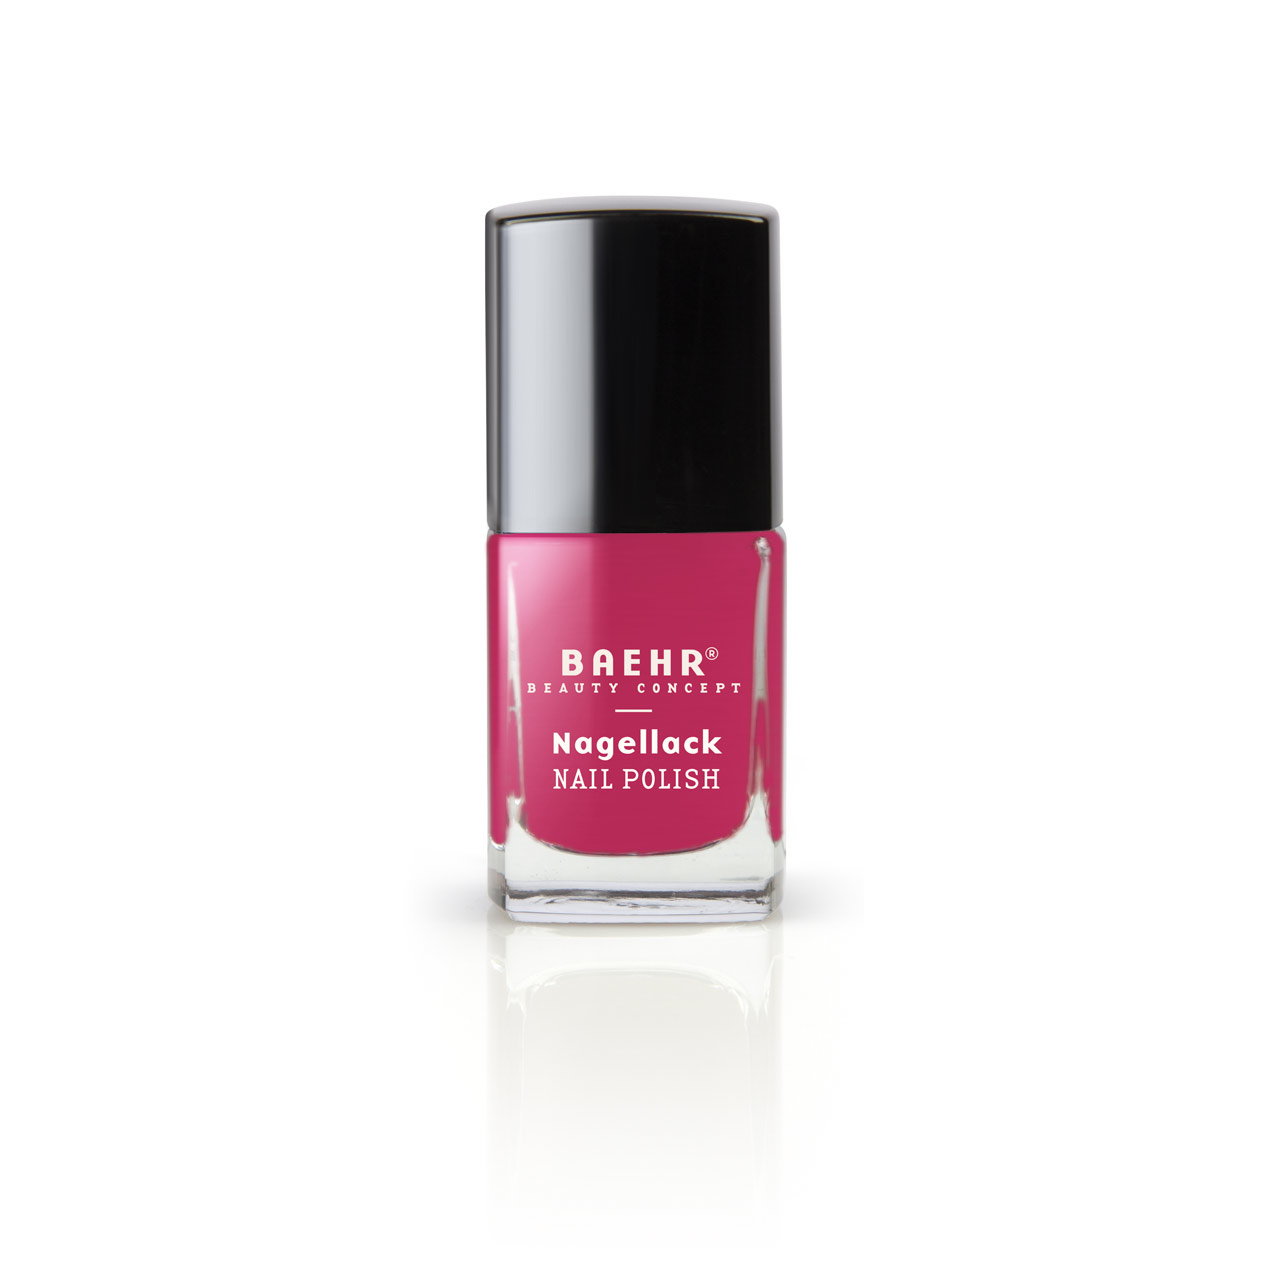 BAEHR BEAUTY CONCEPT - NAILS Nagellack pink soft pastell 11 ml